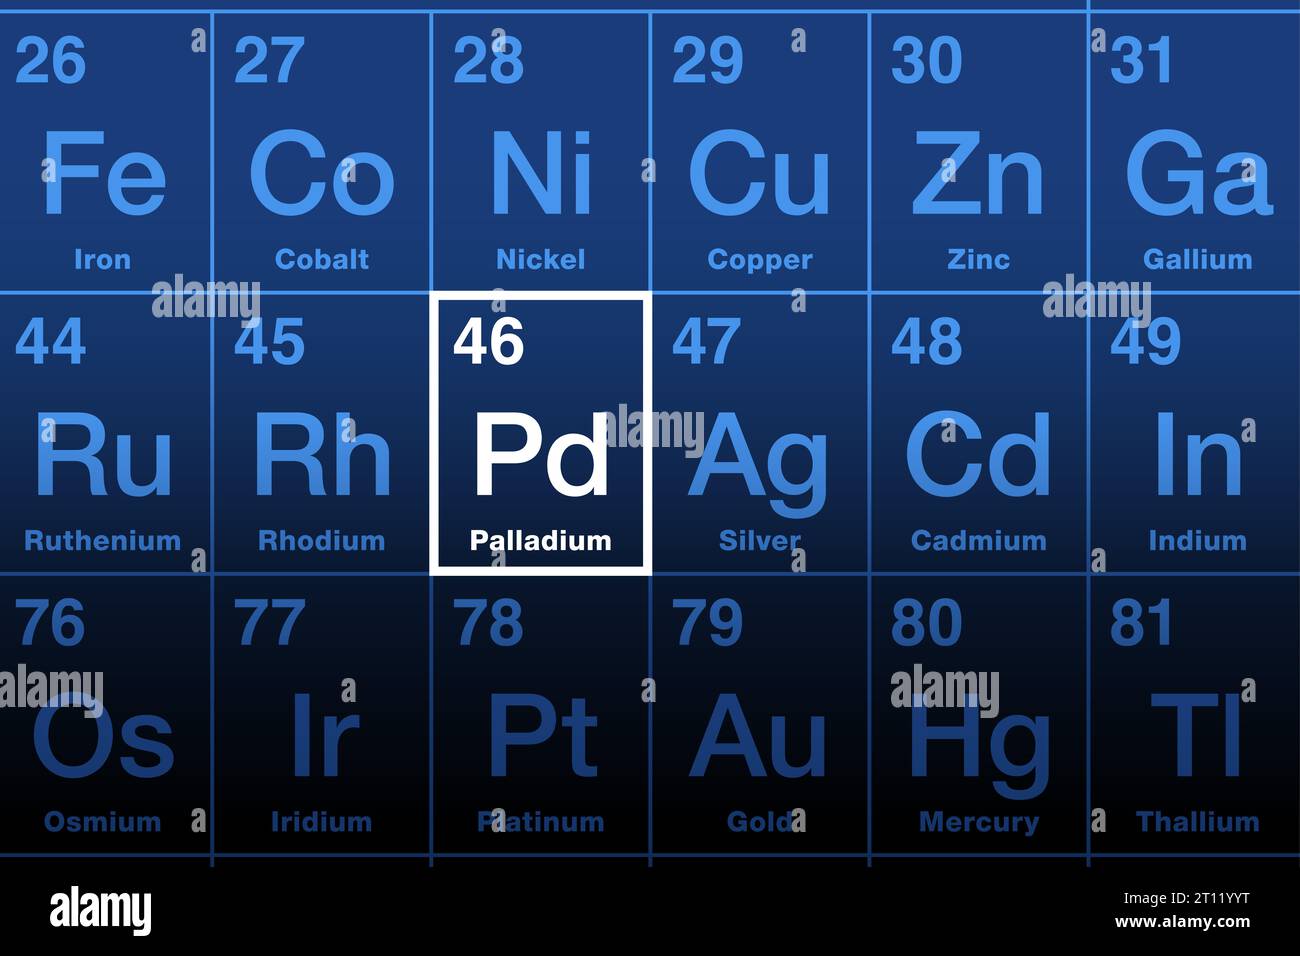 Palladium on periodic table of the elements. Chemical element with symbol Pd and atomic number 46. Named after the asteroid Pallas, a transition metal. Stock Photo